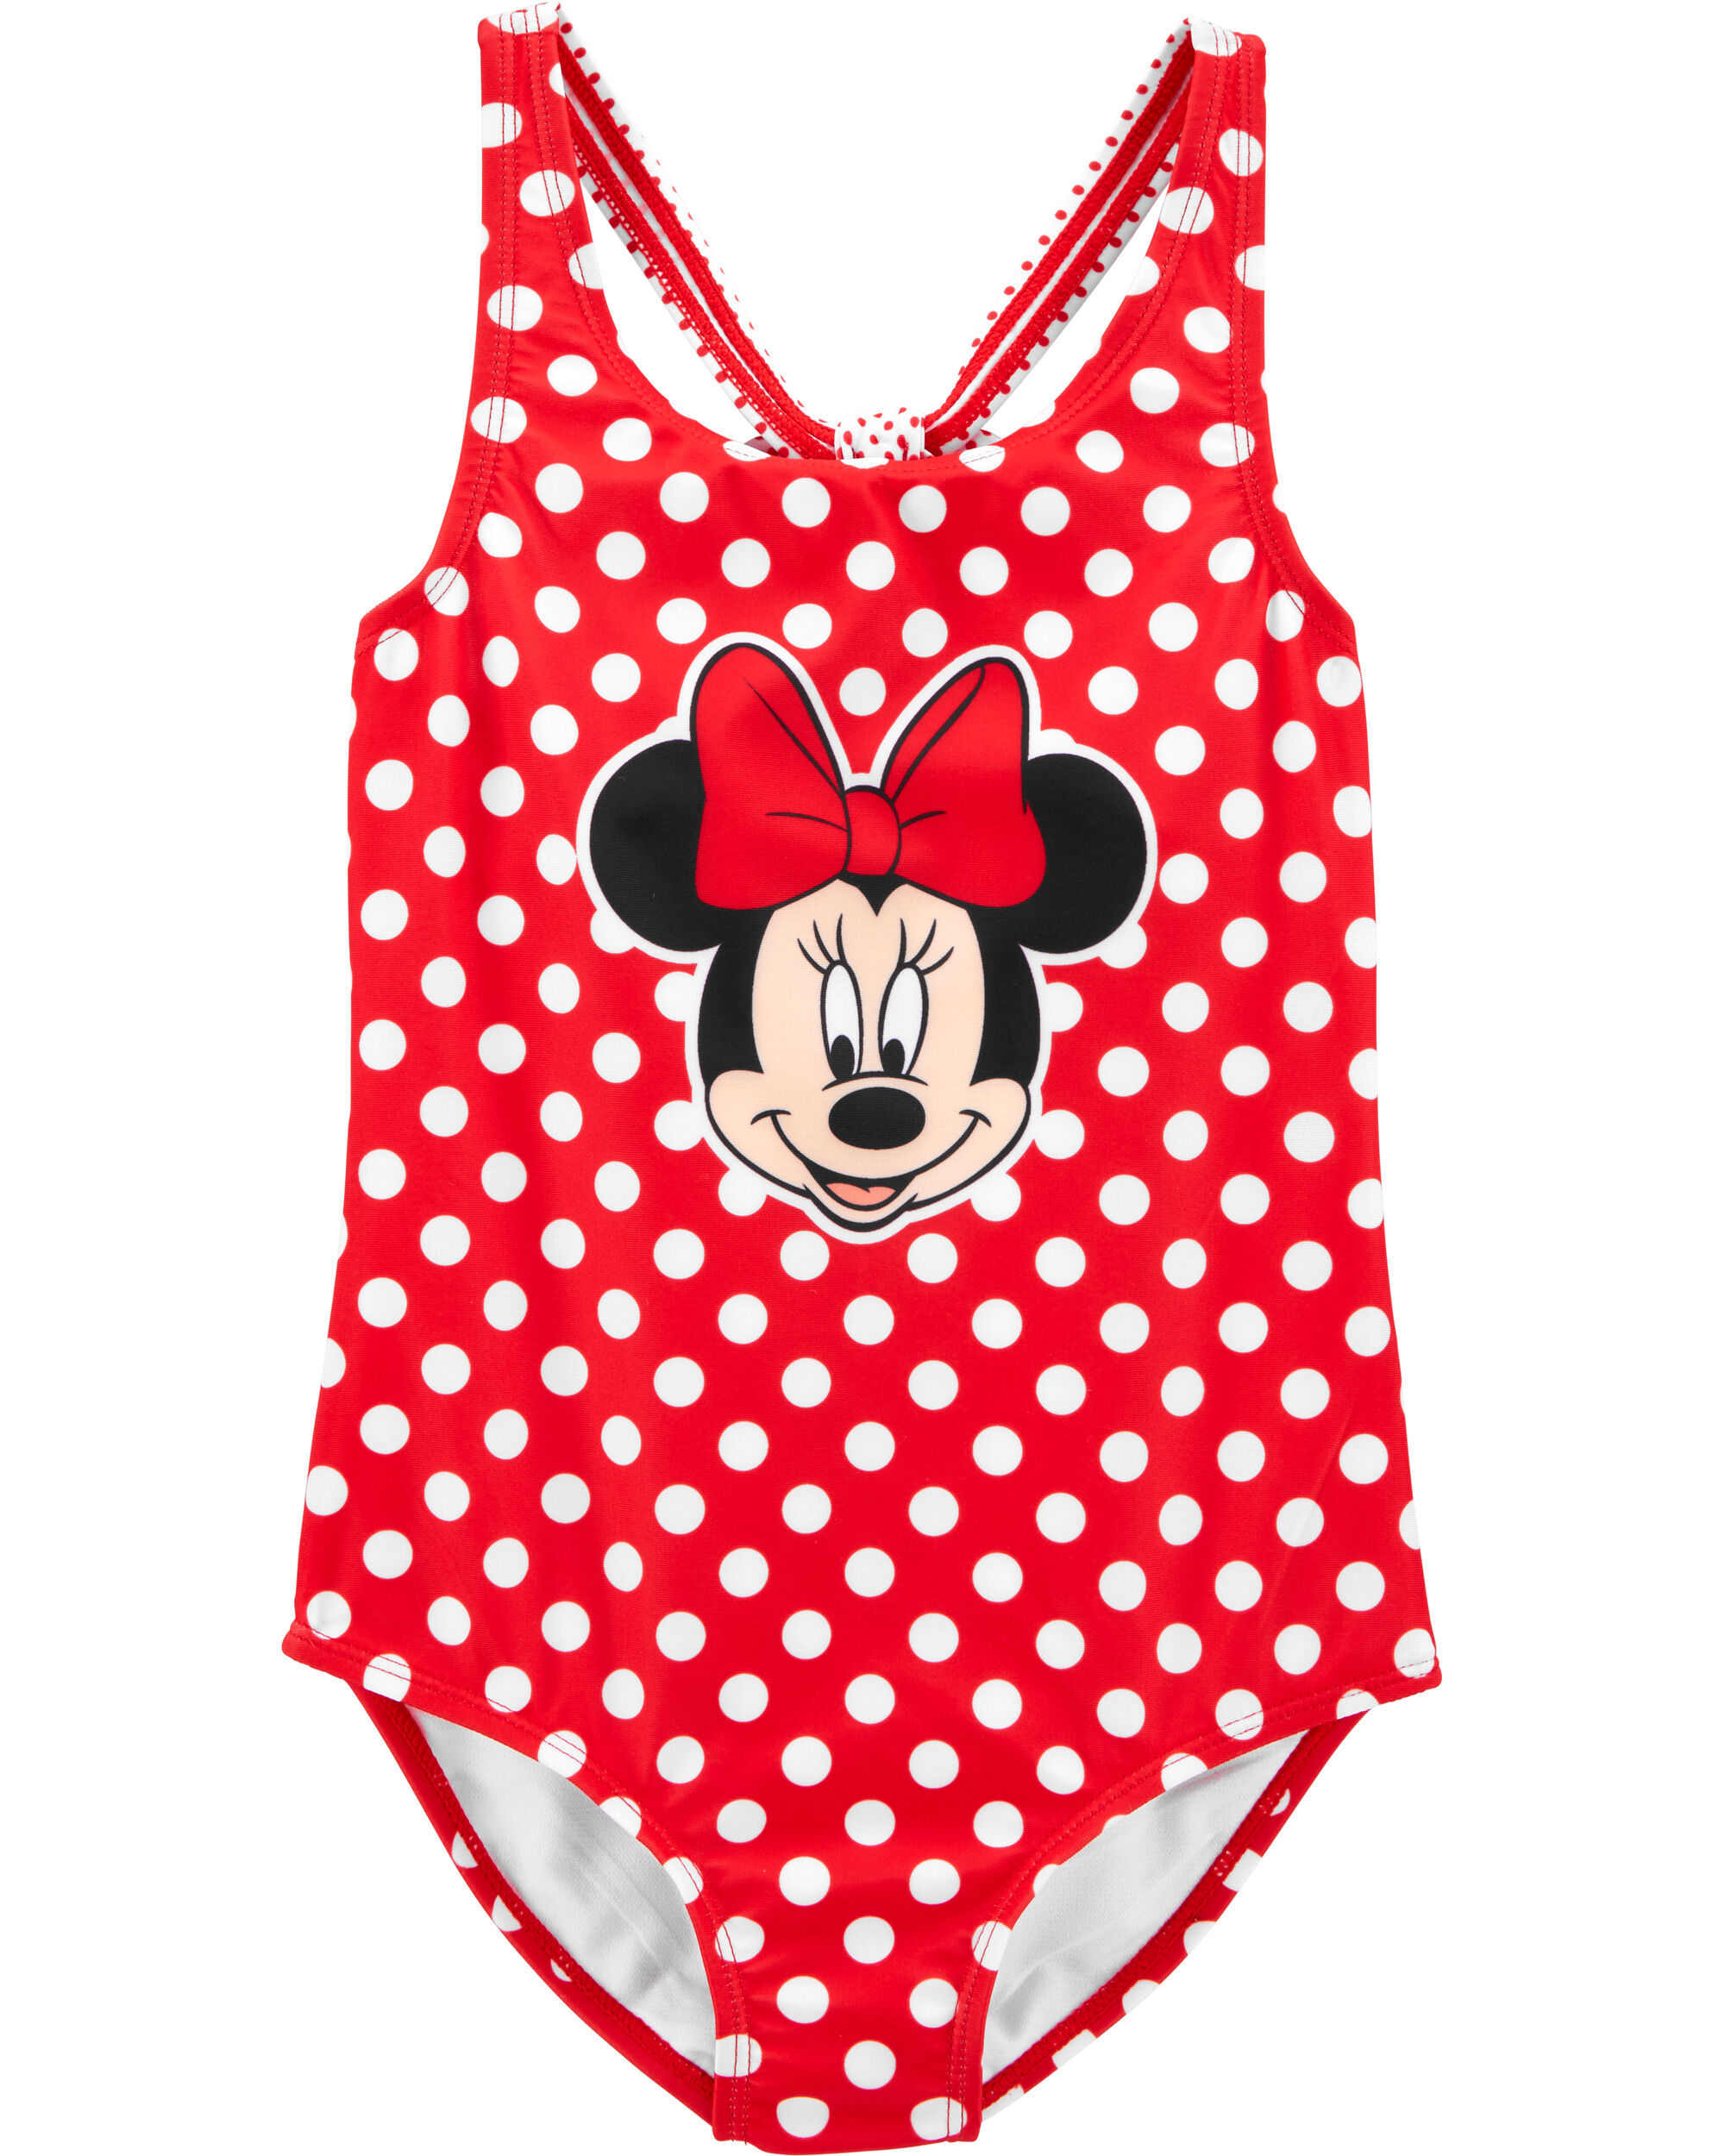 minnie mouse swimsuit baby